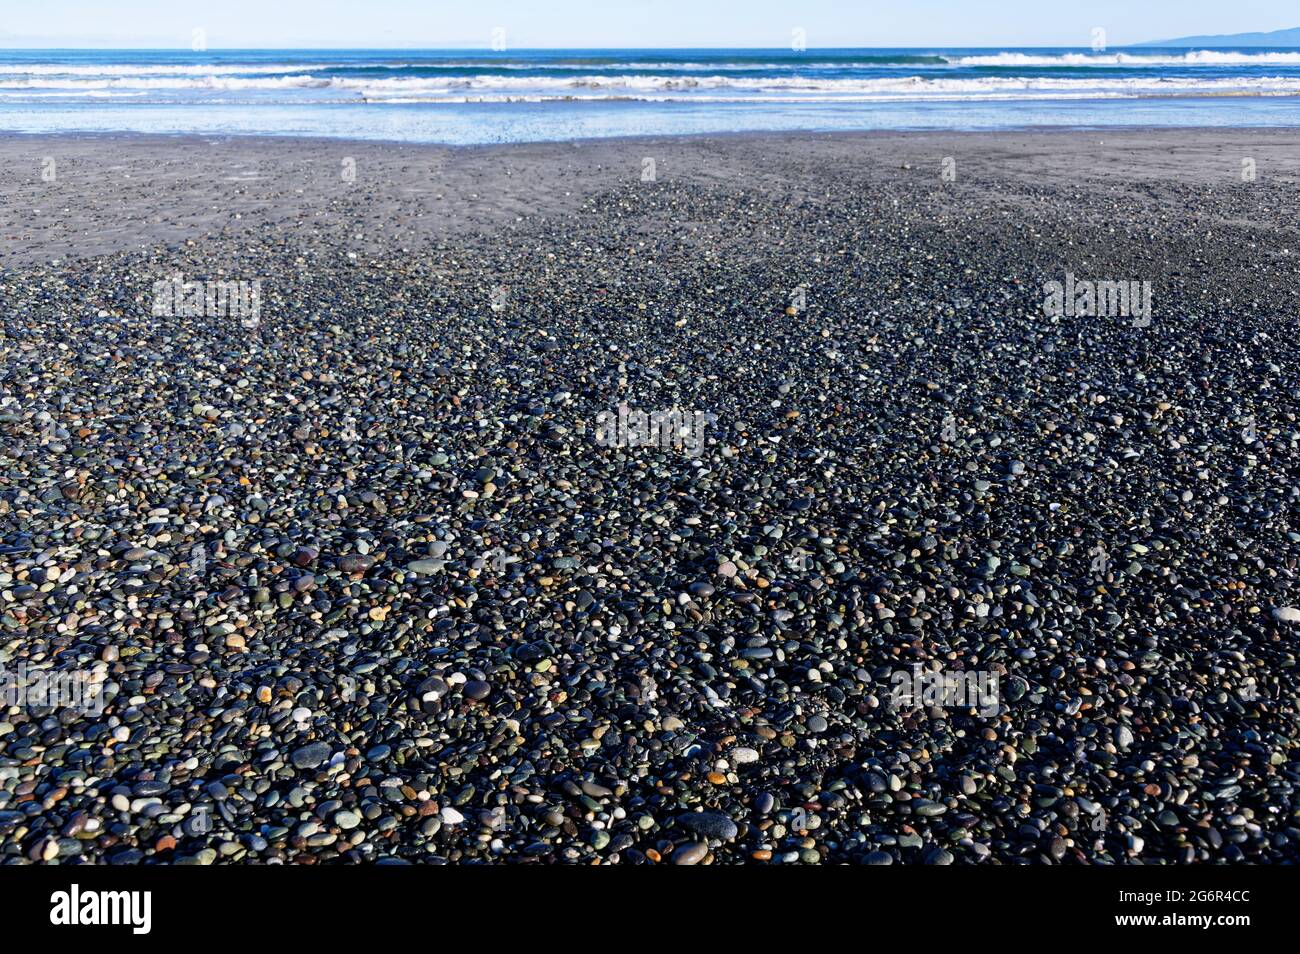 Stones and possibly gems, cover the shore at Gem Stone Beach, Western Southland, New Zealand Stock Photo